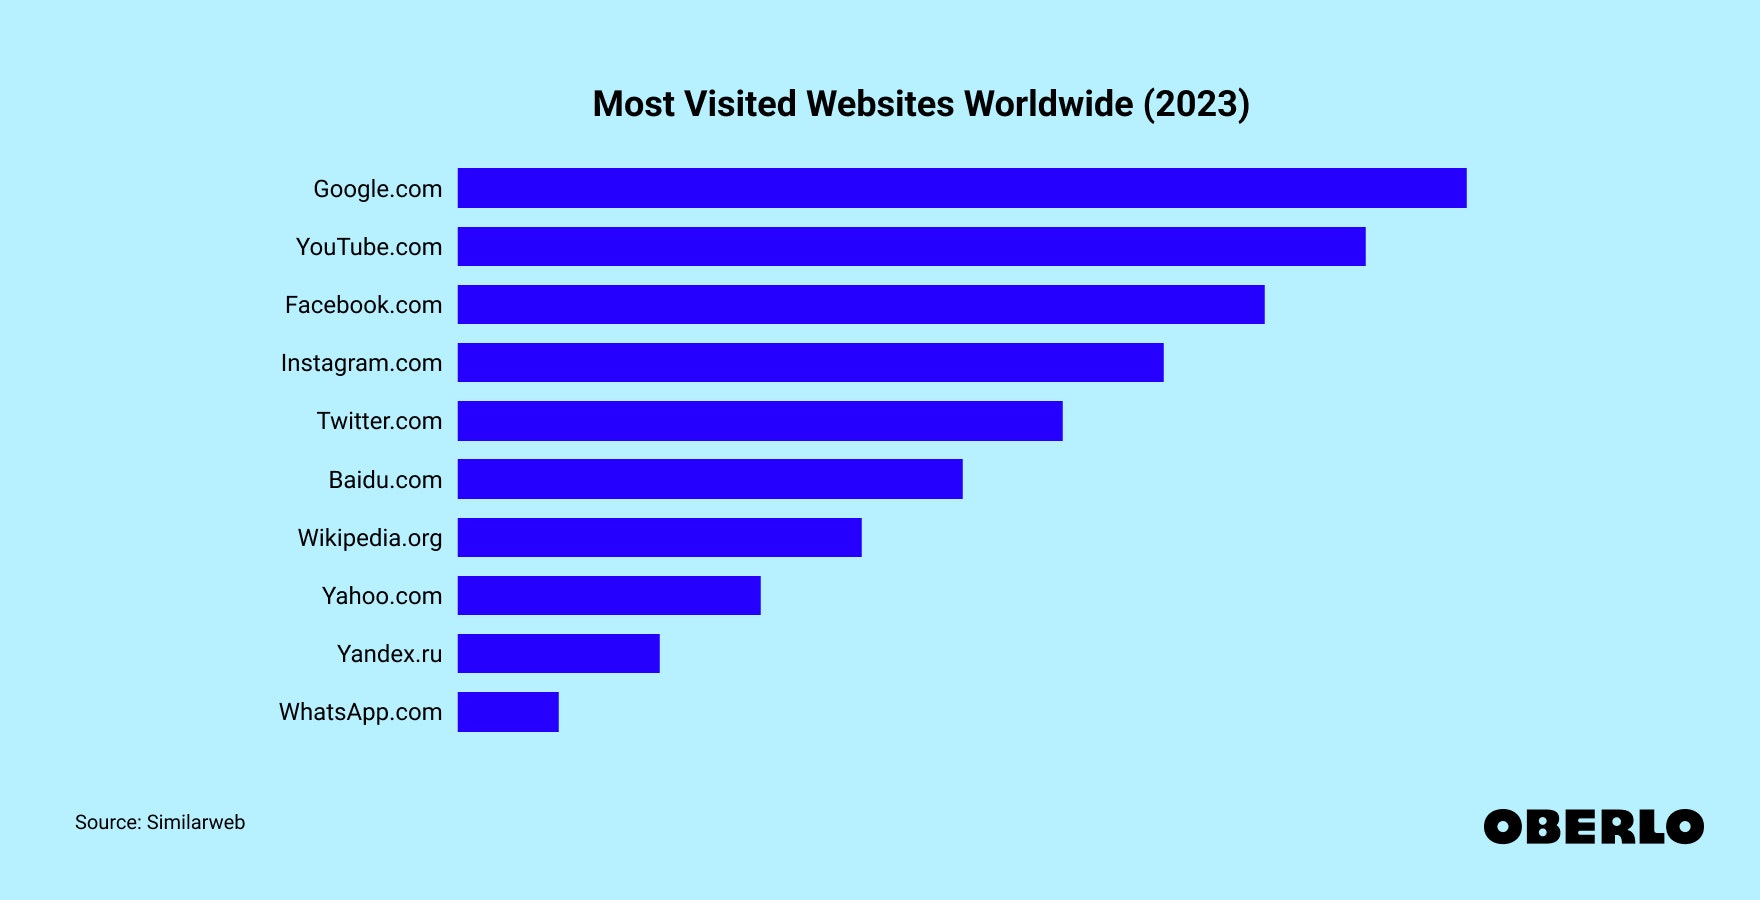 Chart of Most Visited Websites Worldwide (2022)